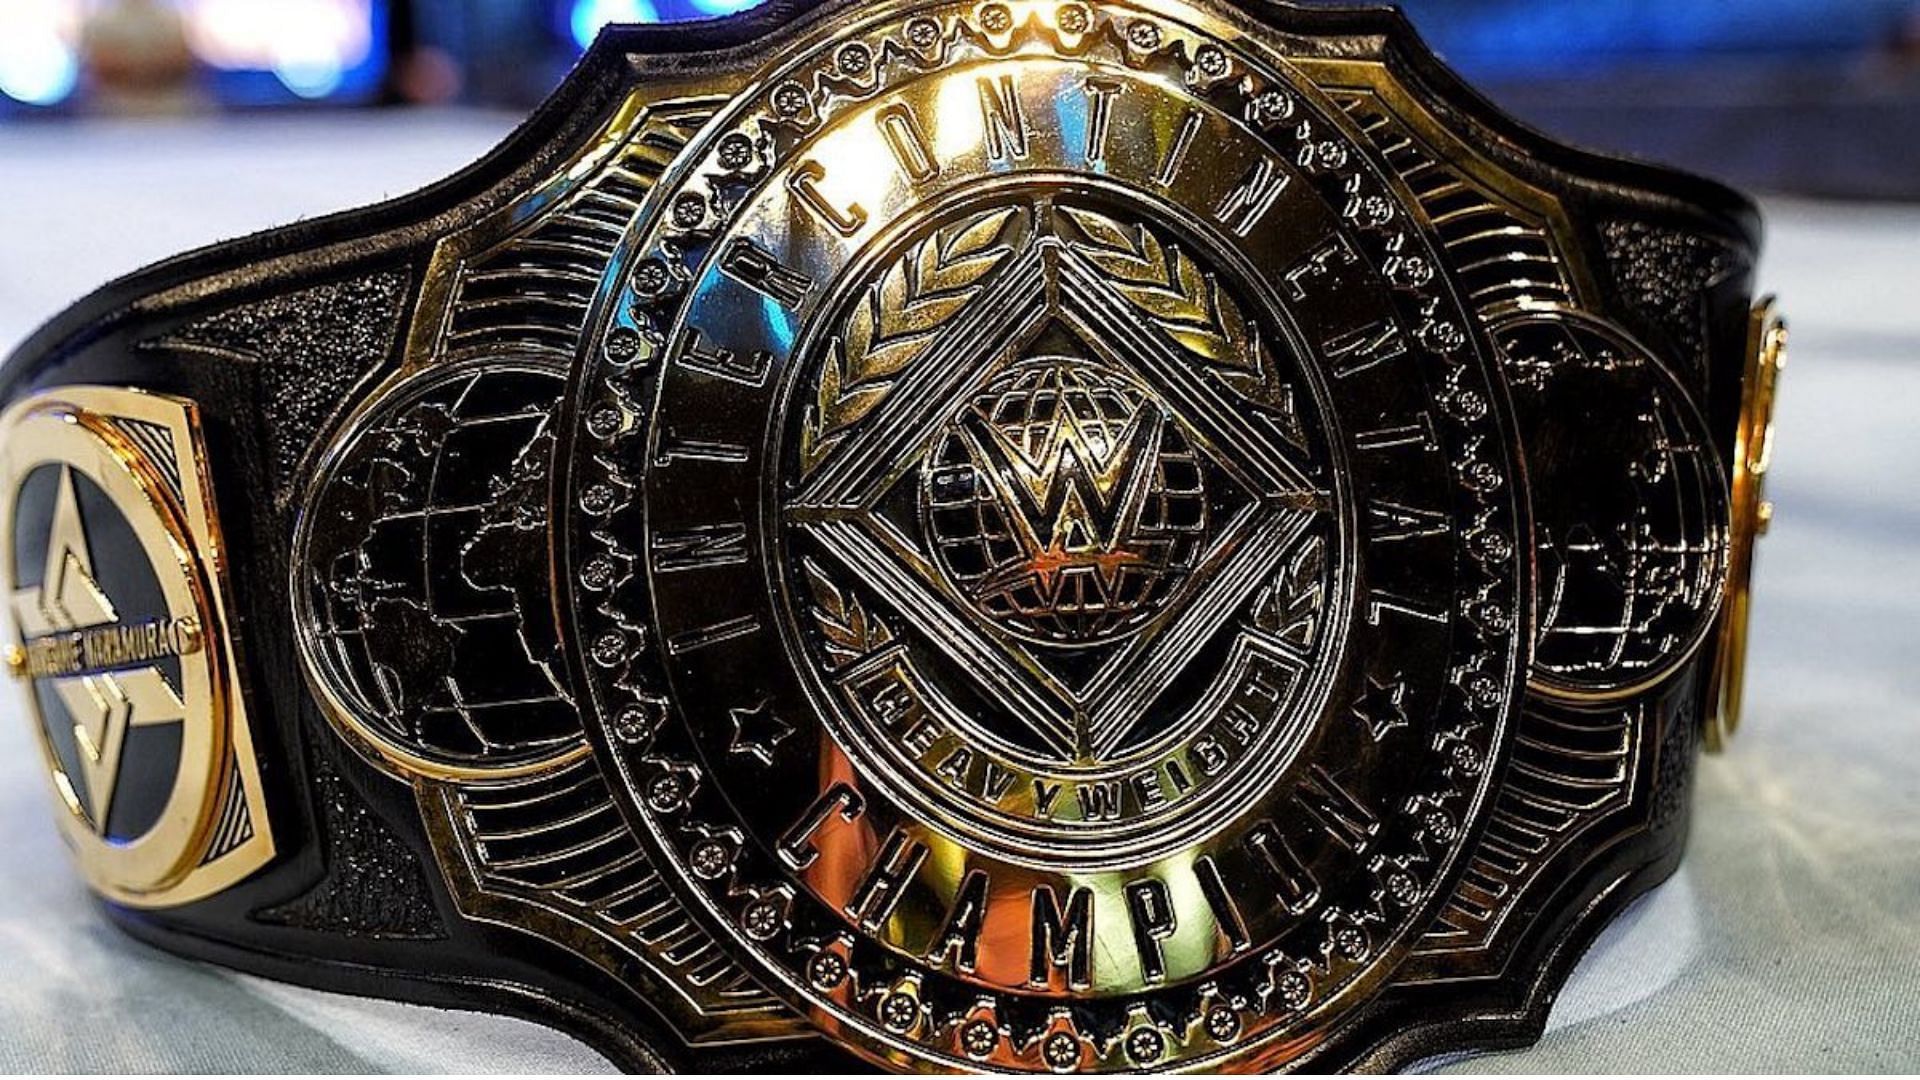 The Intercontinental Title is currently held by Gunther